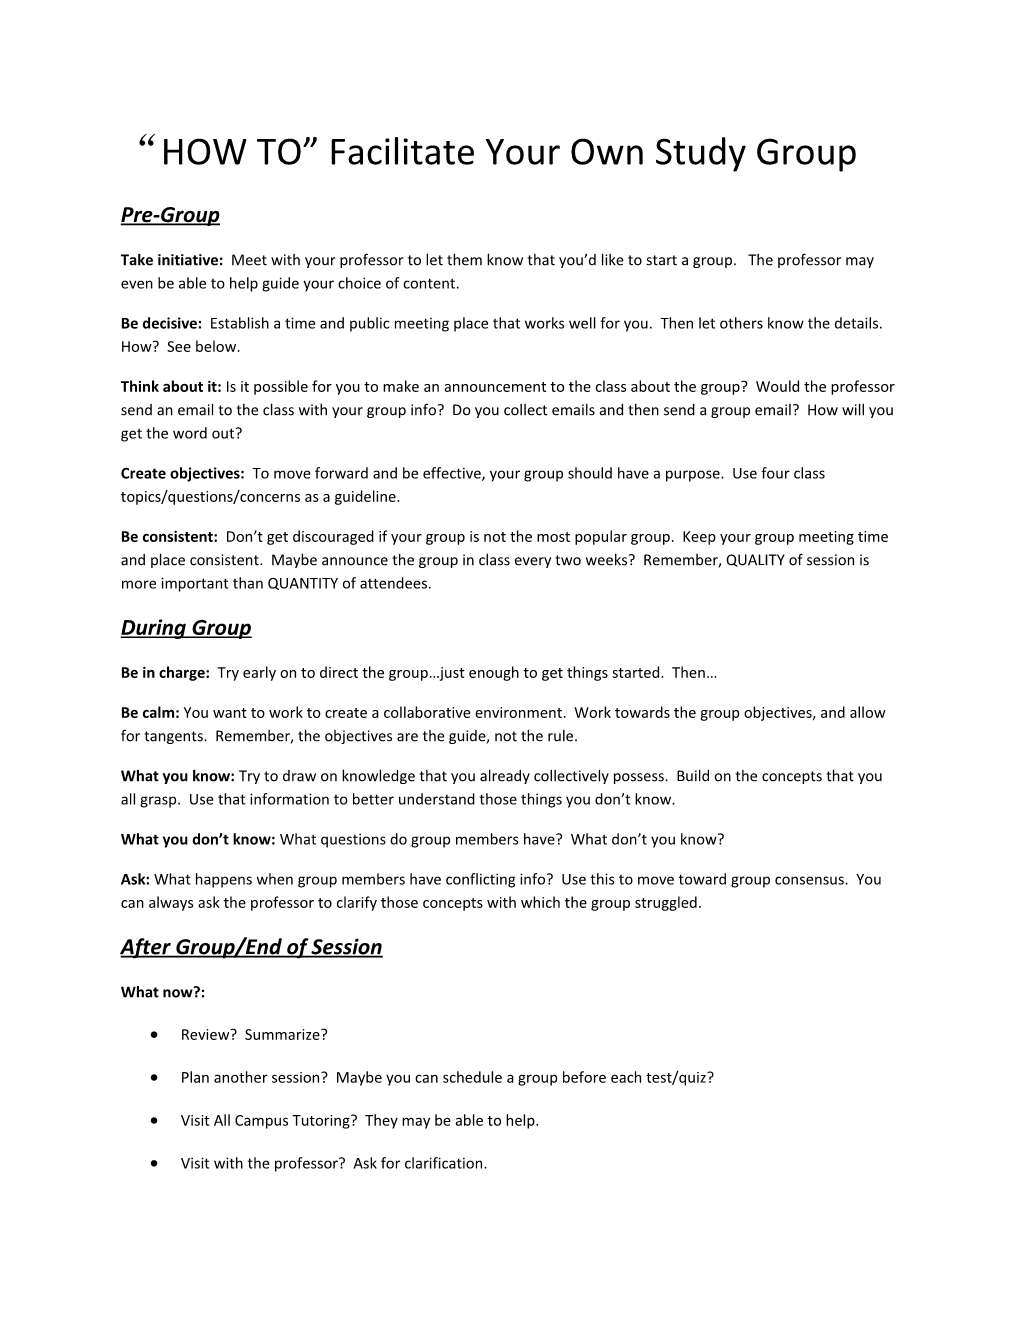 HOW to Facilitate Your Own Study Group